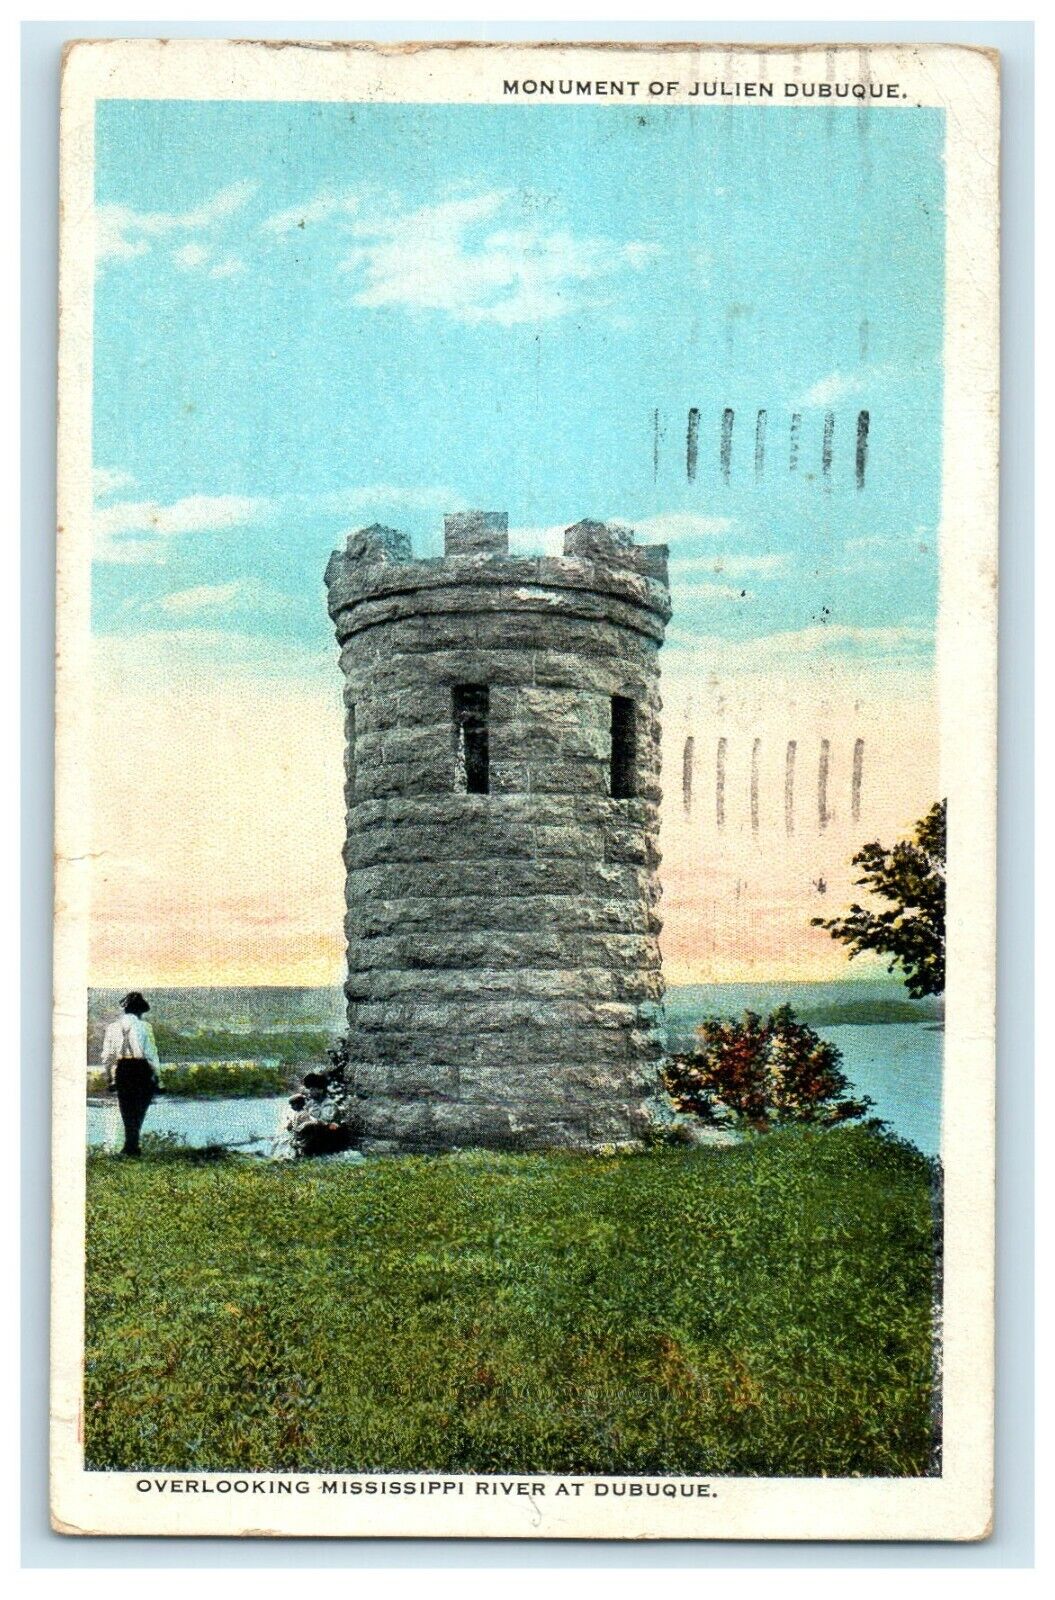 1924 View Of Monument Of Julien Dubuque Iowa IA Posted Vintage Postcard